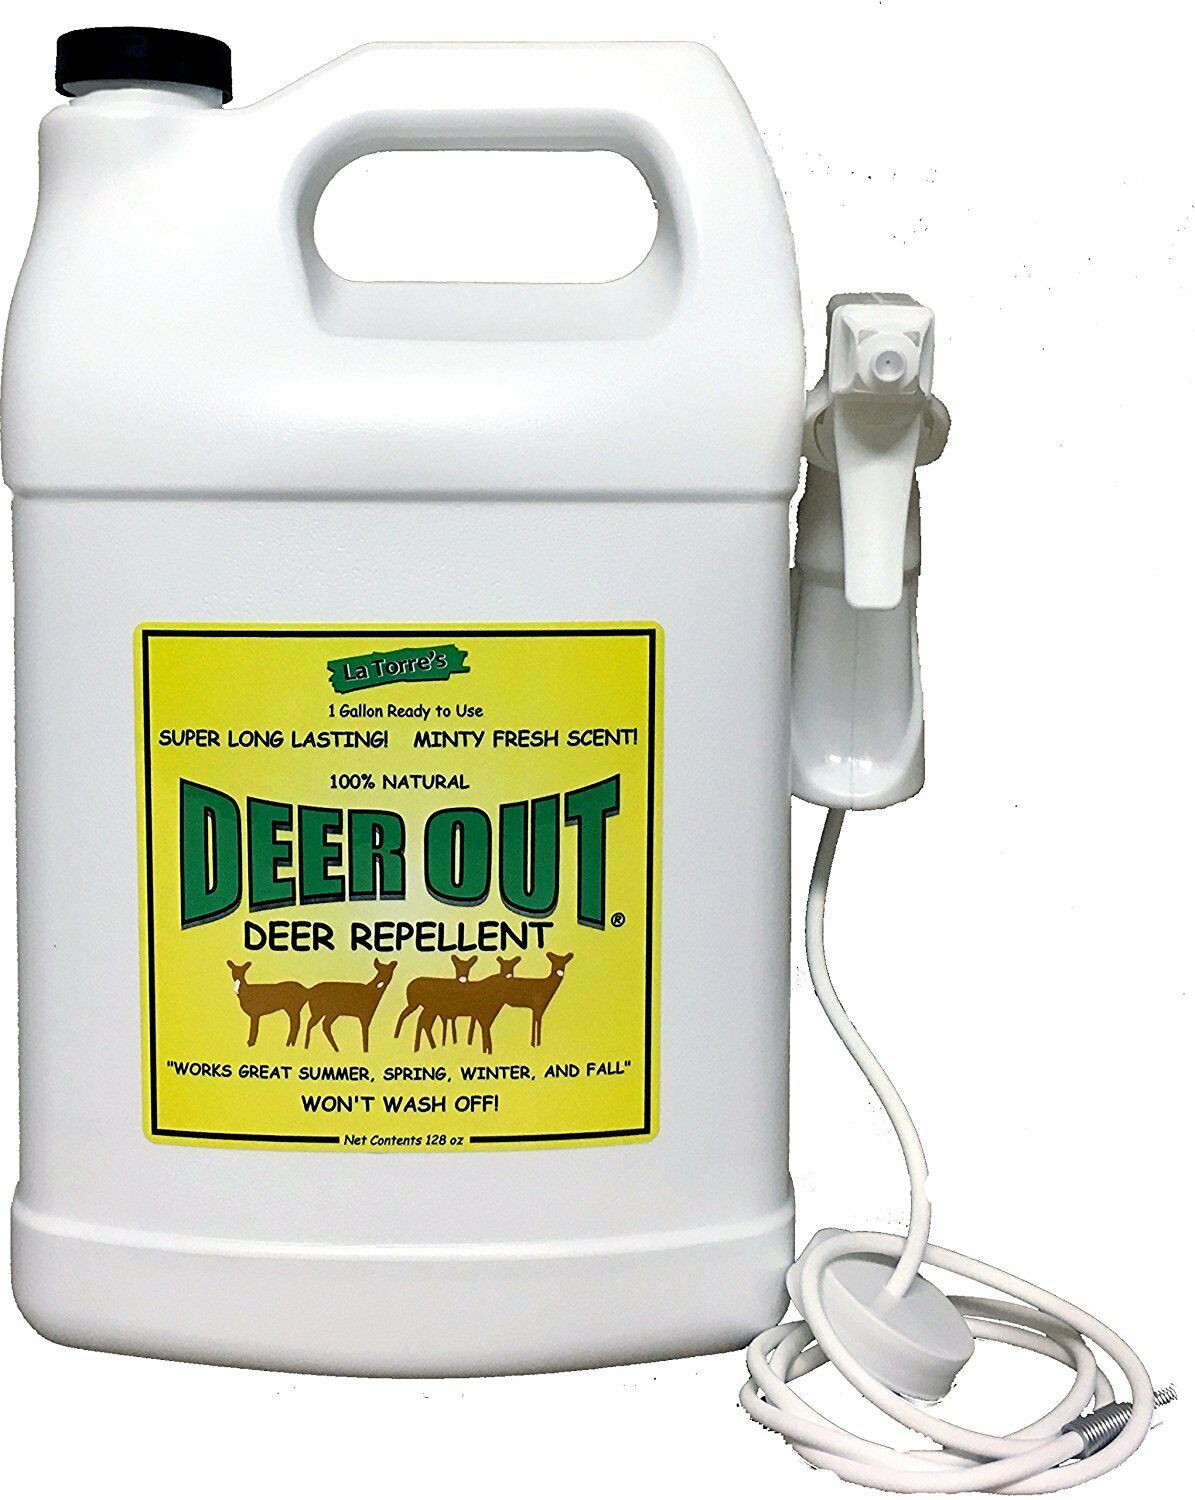 Deer Out 1 Gallon Ready to Use Deer Repellent